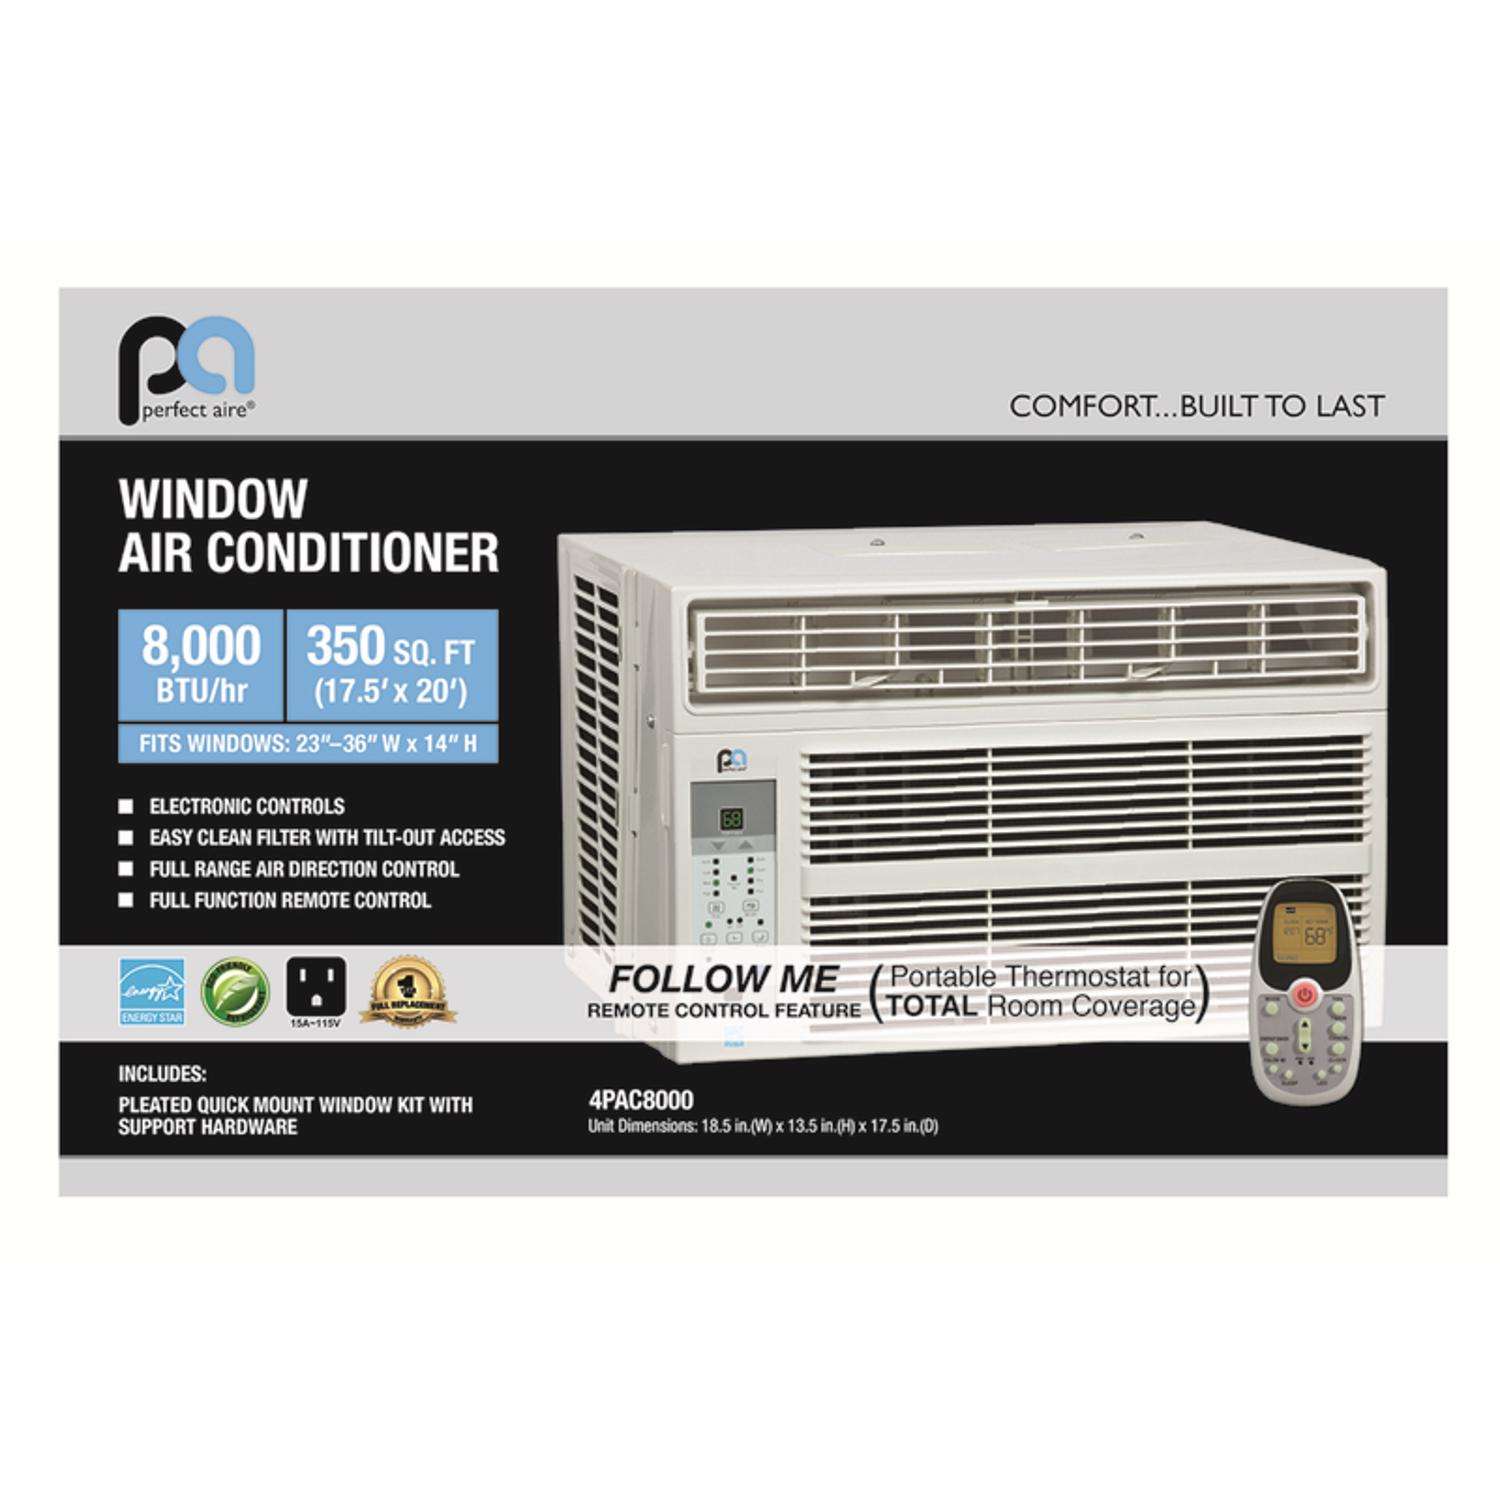 tragedy Institute confirm Perfect Aire 8000 BTU Window Air Conditioner w/Remote - Ace Hardware